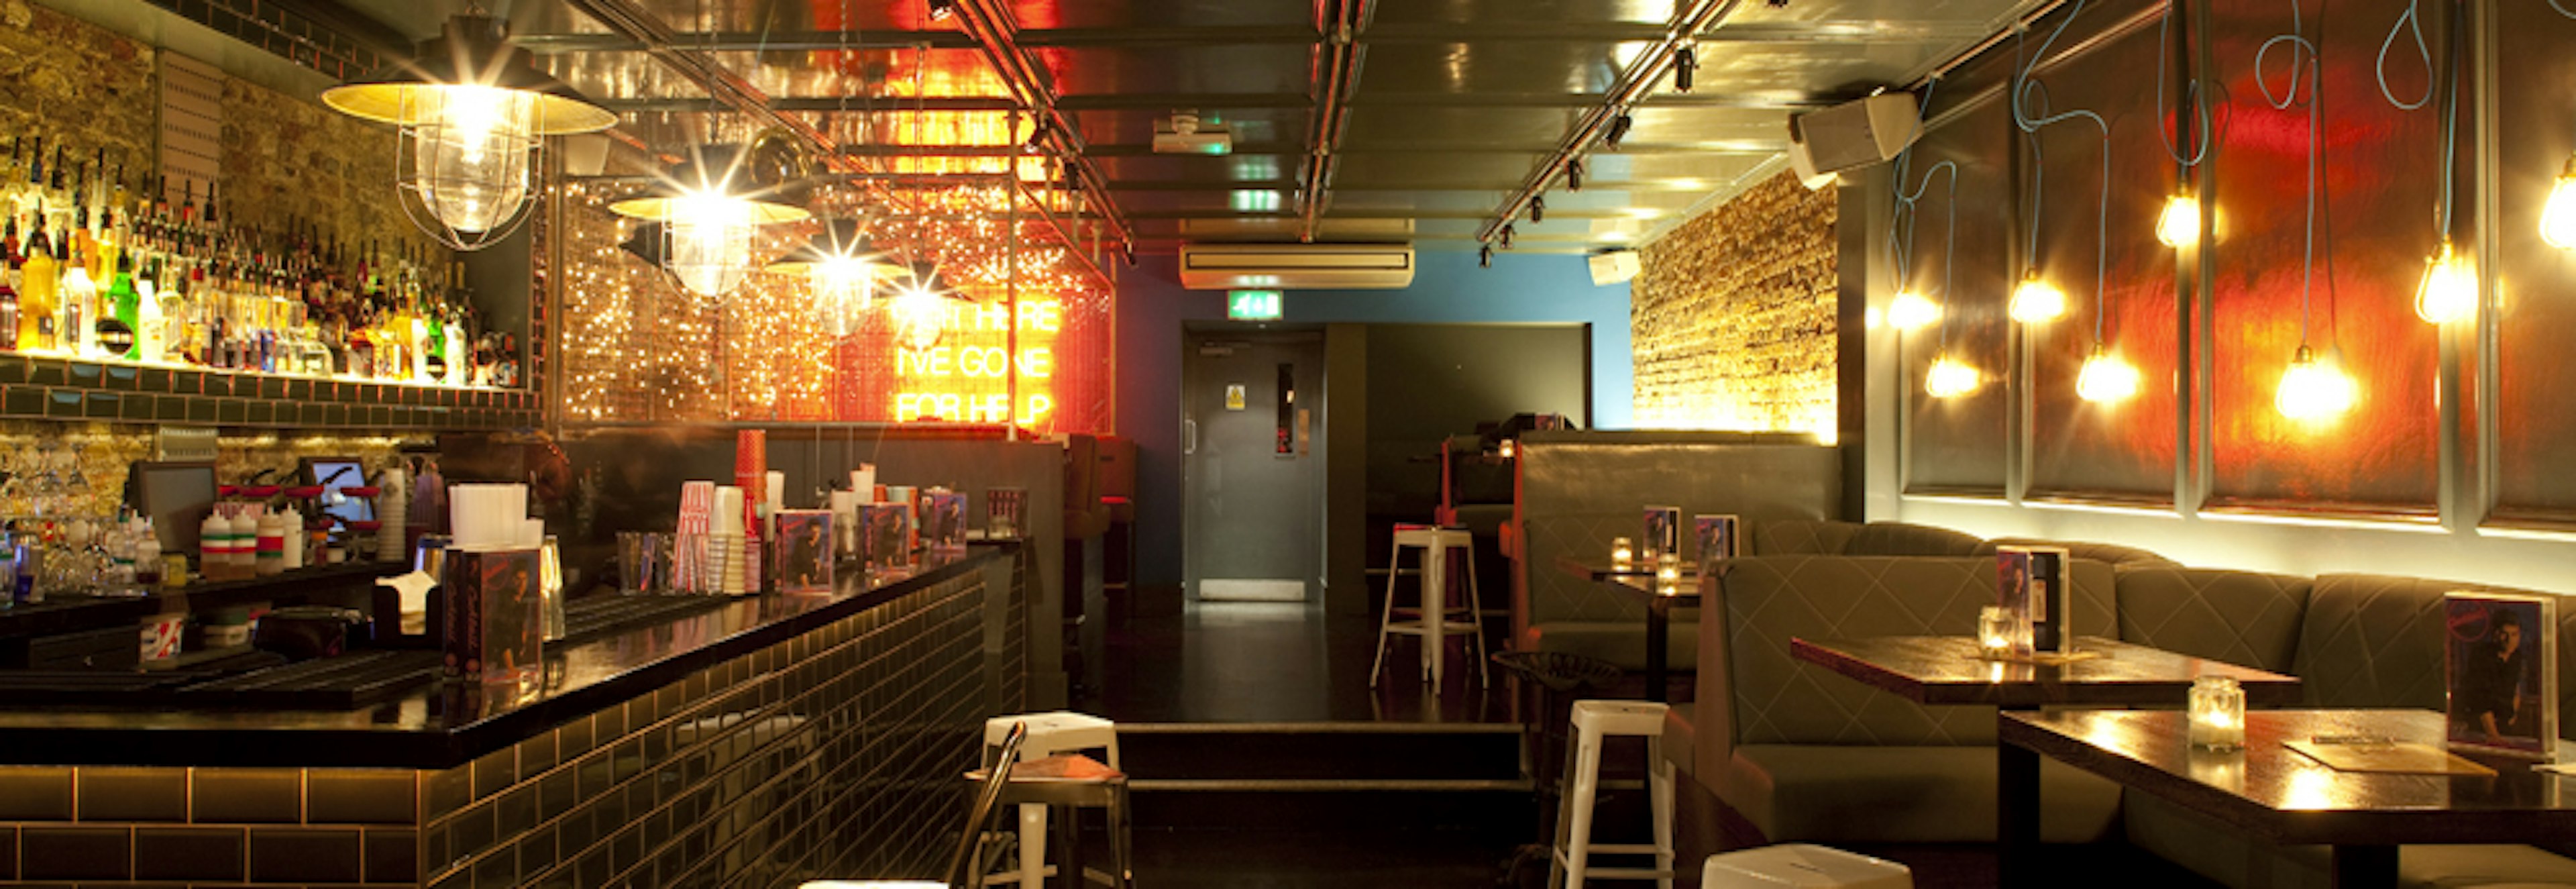 Bars to Hire London